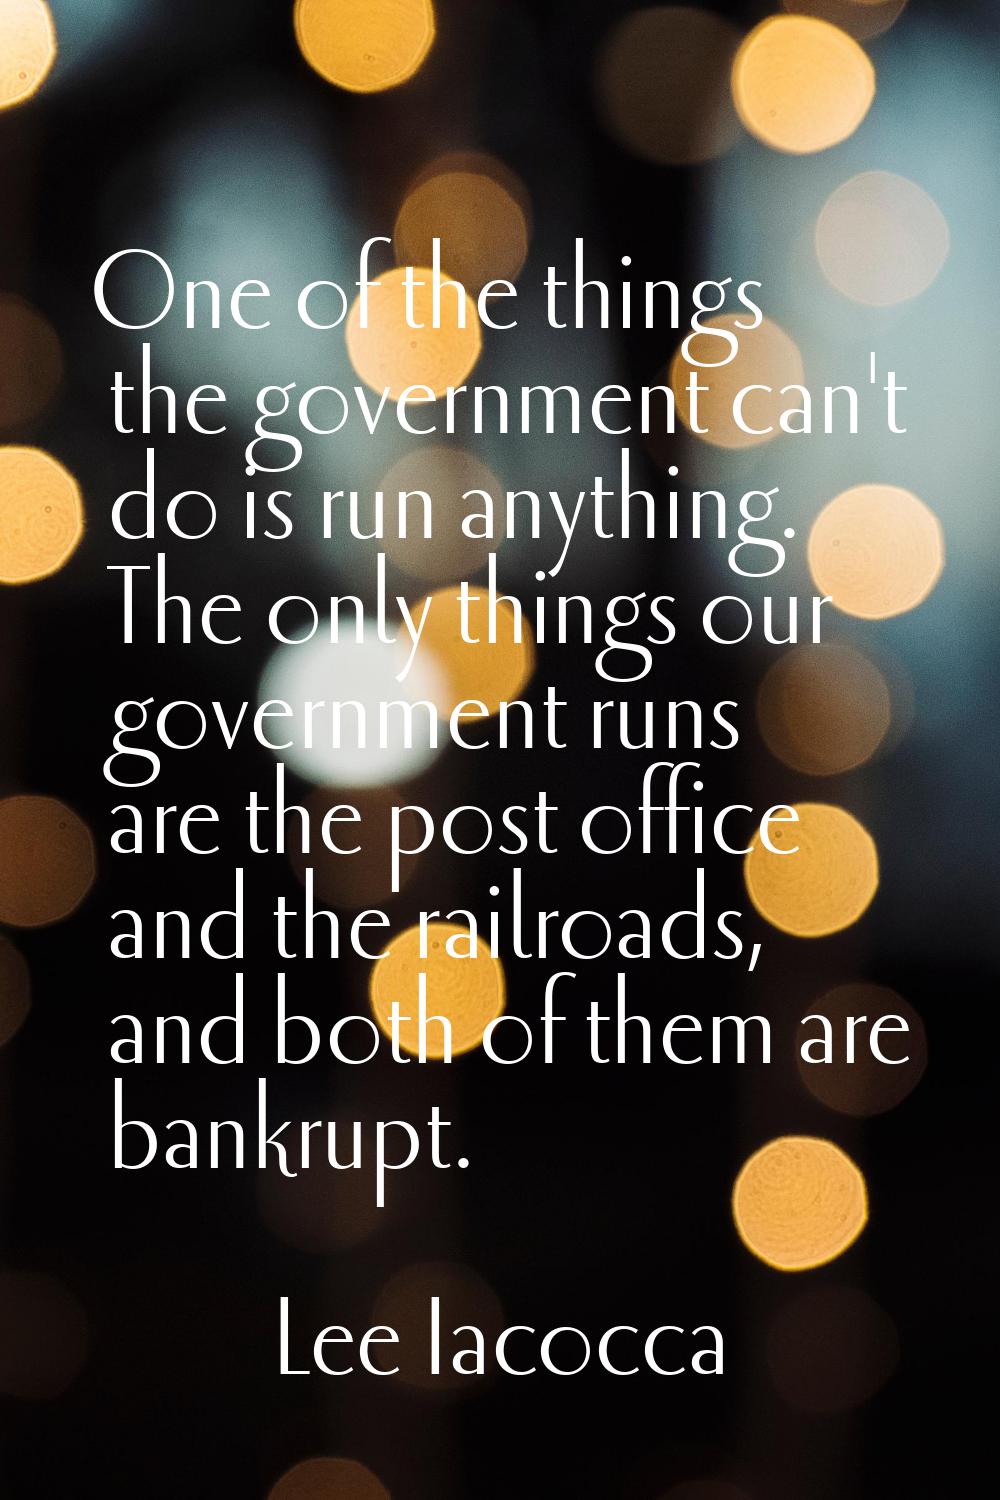 One of the things the government can't do is run anything. The only things our government runs are 